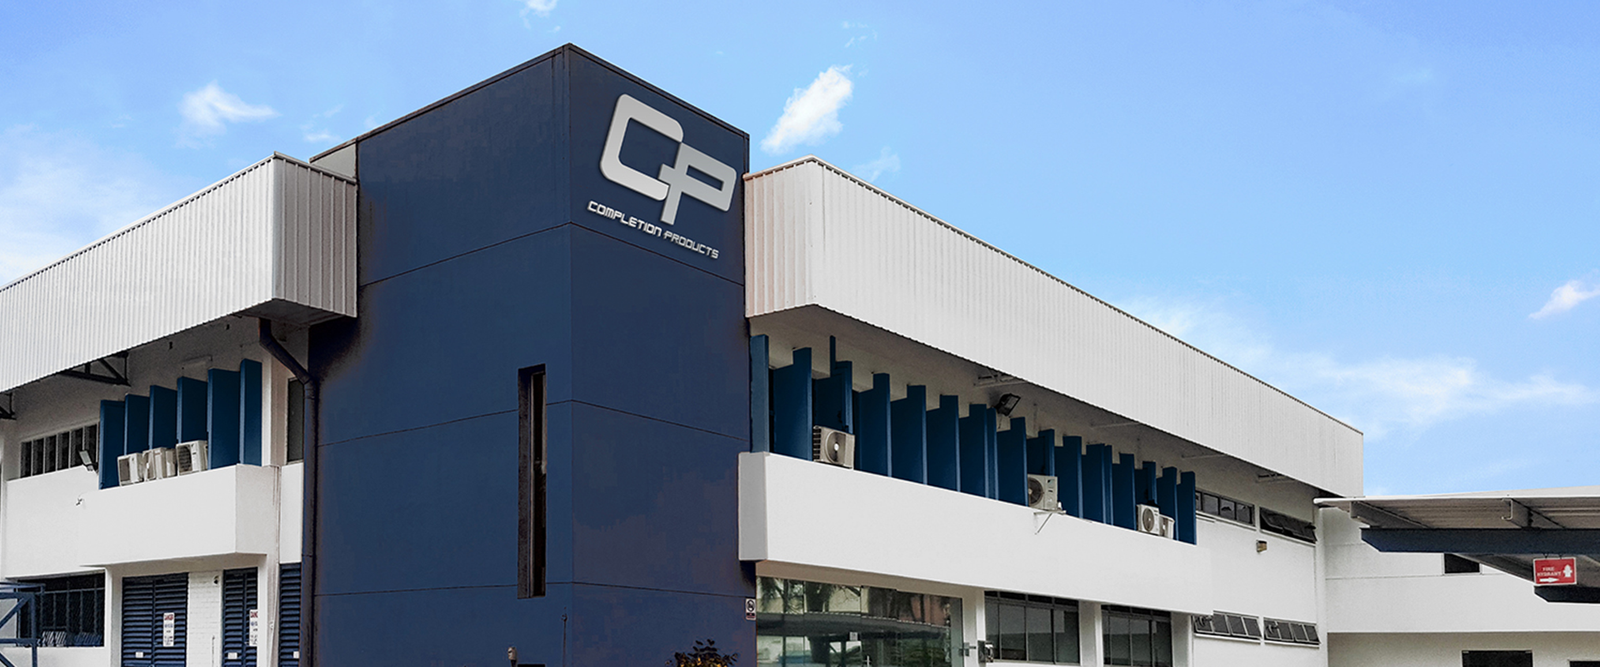 Completion Products singapore company building facility headquarter redesign